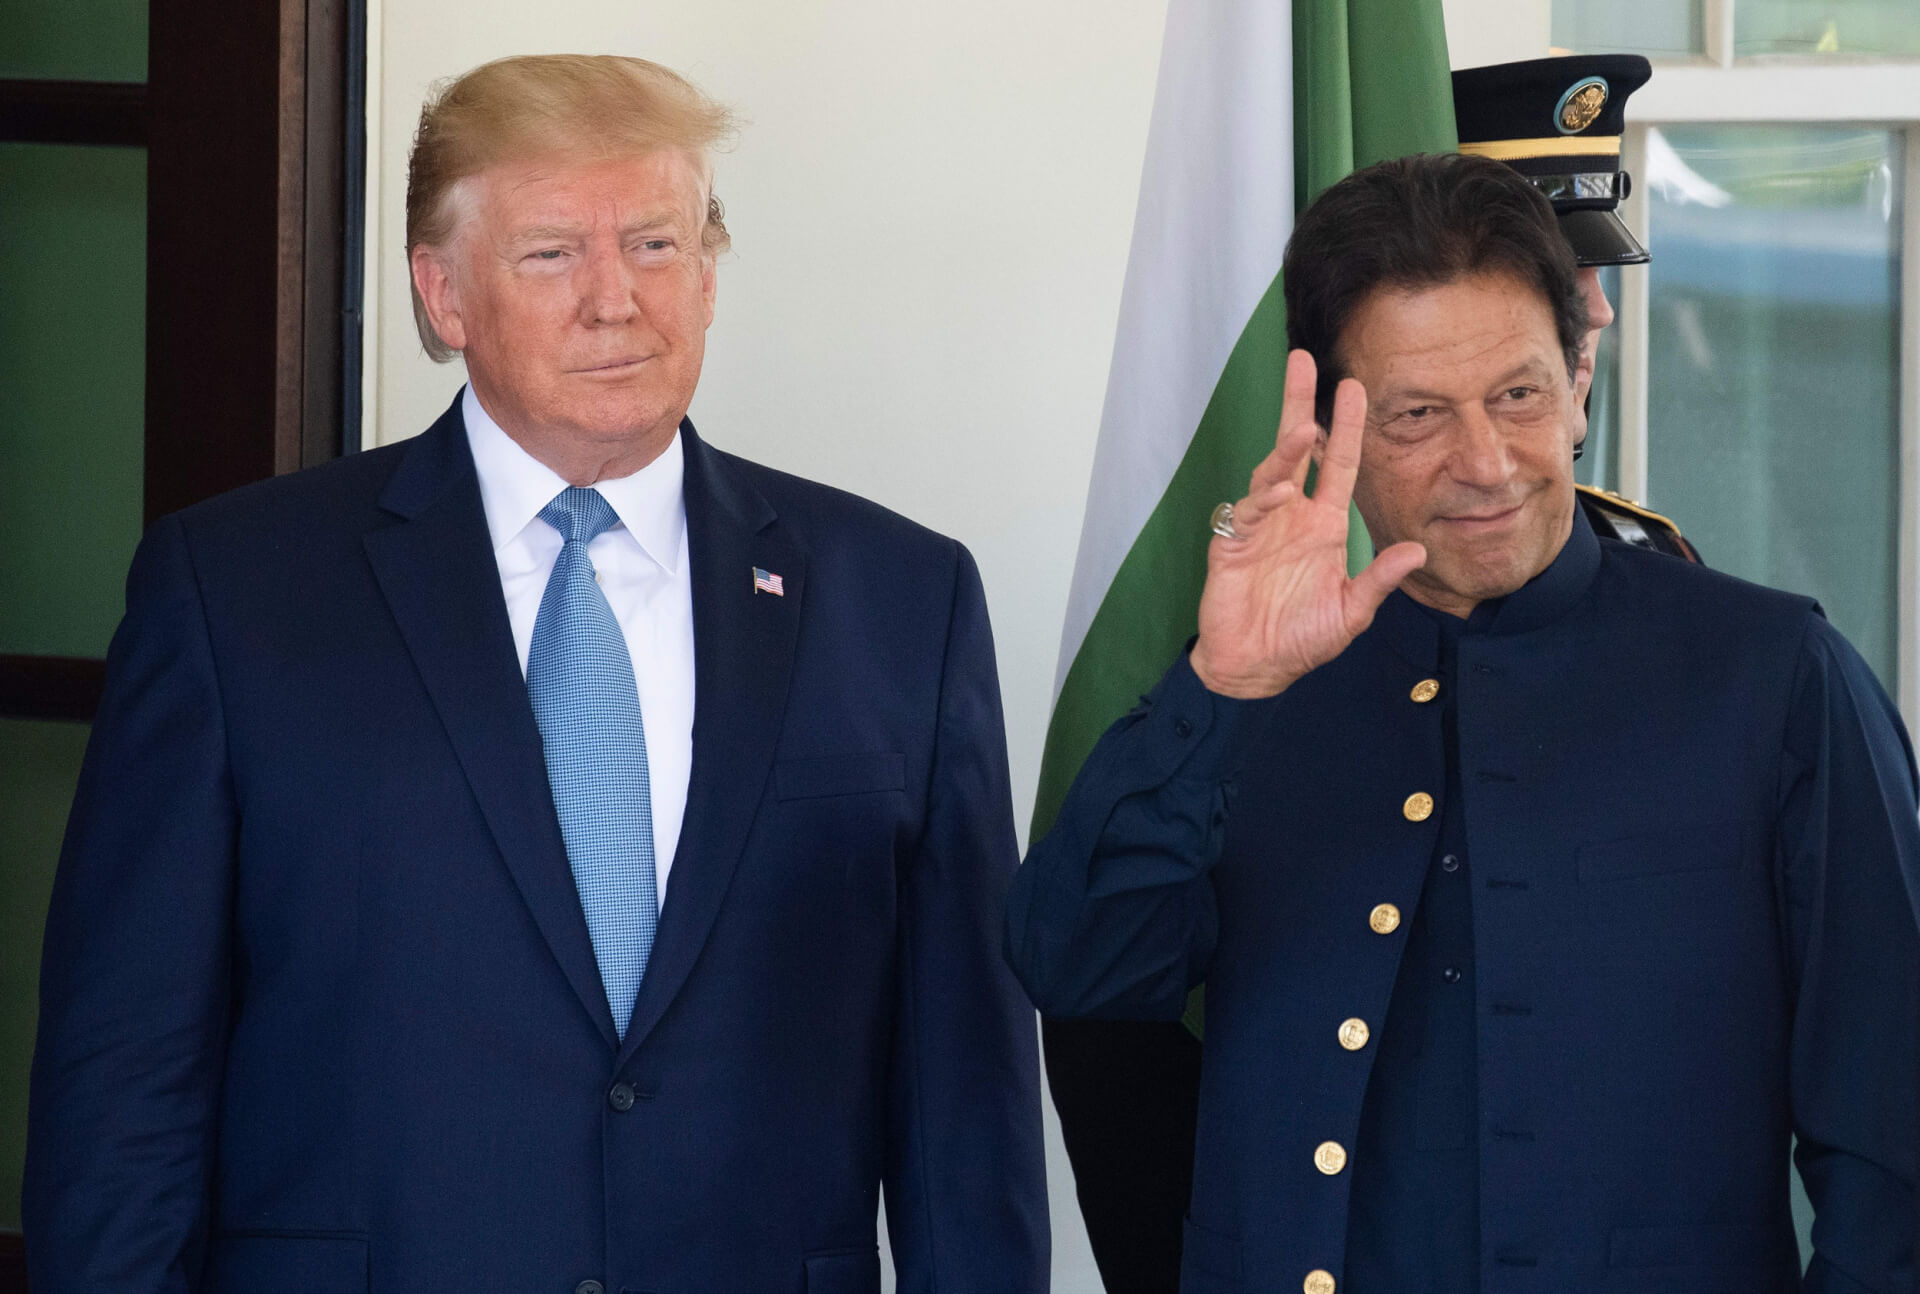 South Asia in Review: April 23, 2020